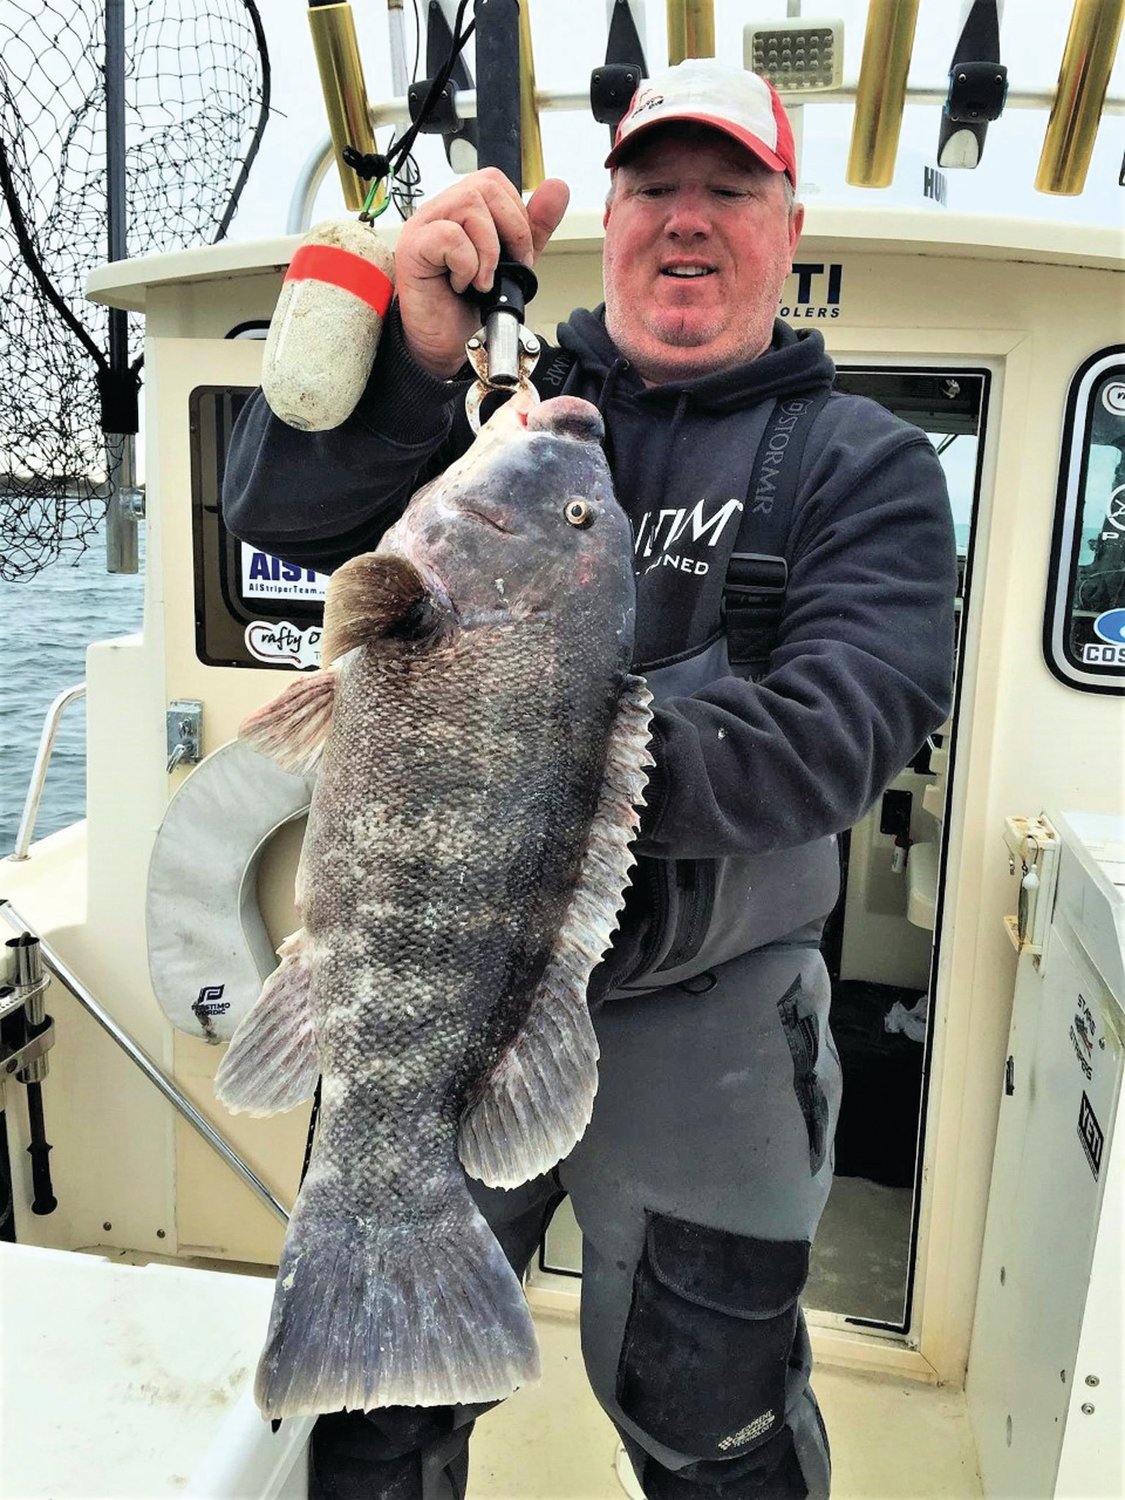 PRIZE CATCH: Capt. BJ Silvia of Flippin’ Out Charters with a prize tautog. Capt. Silvia will be one of the guest panelists at the RI Saltwater Anglers seminar on bottom fishing, Monday, Dec. 26. (Submitted photo)